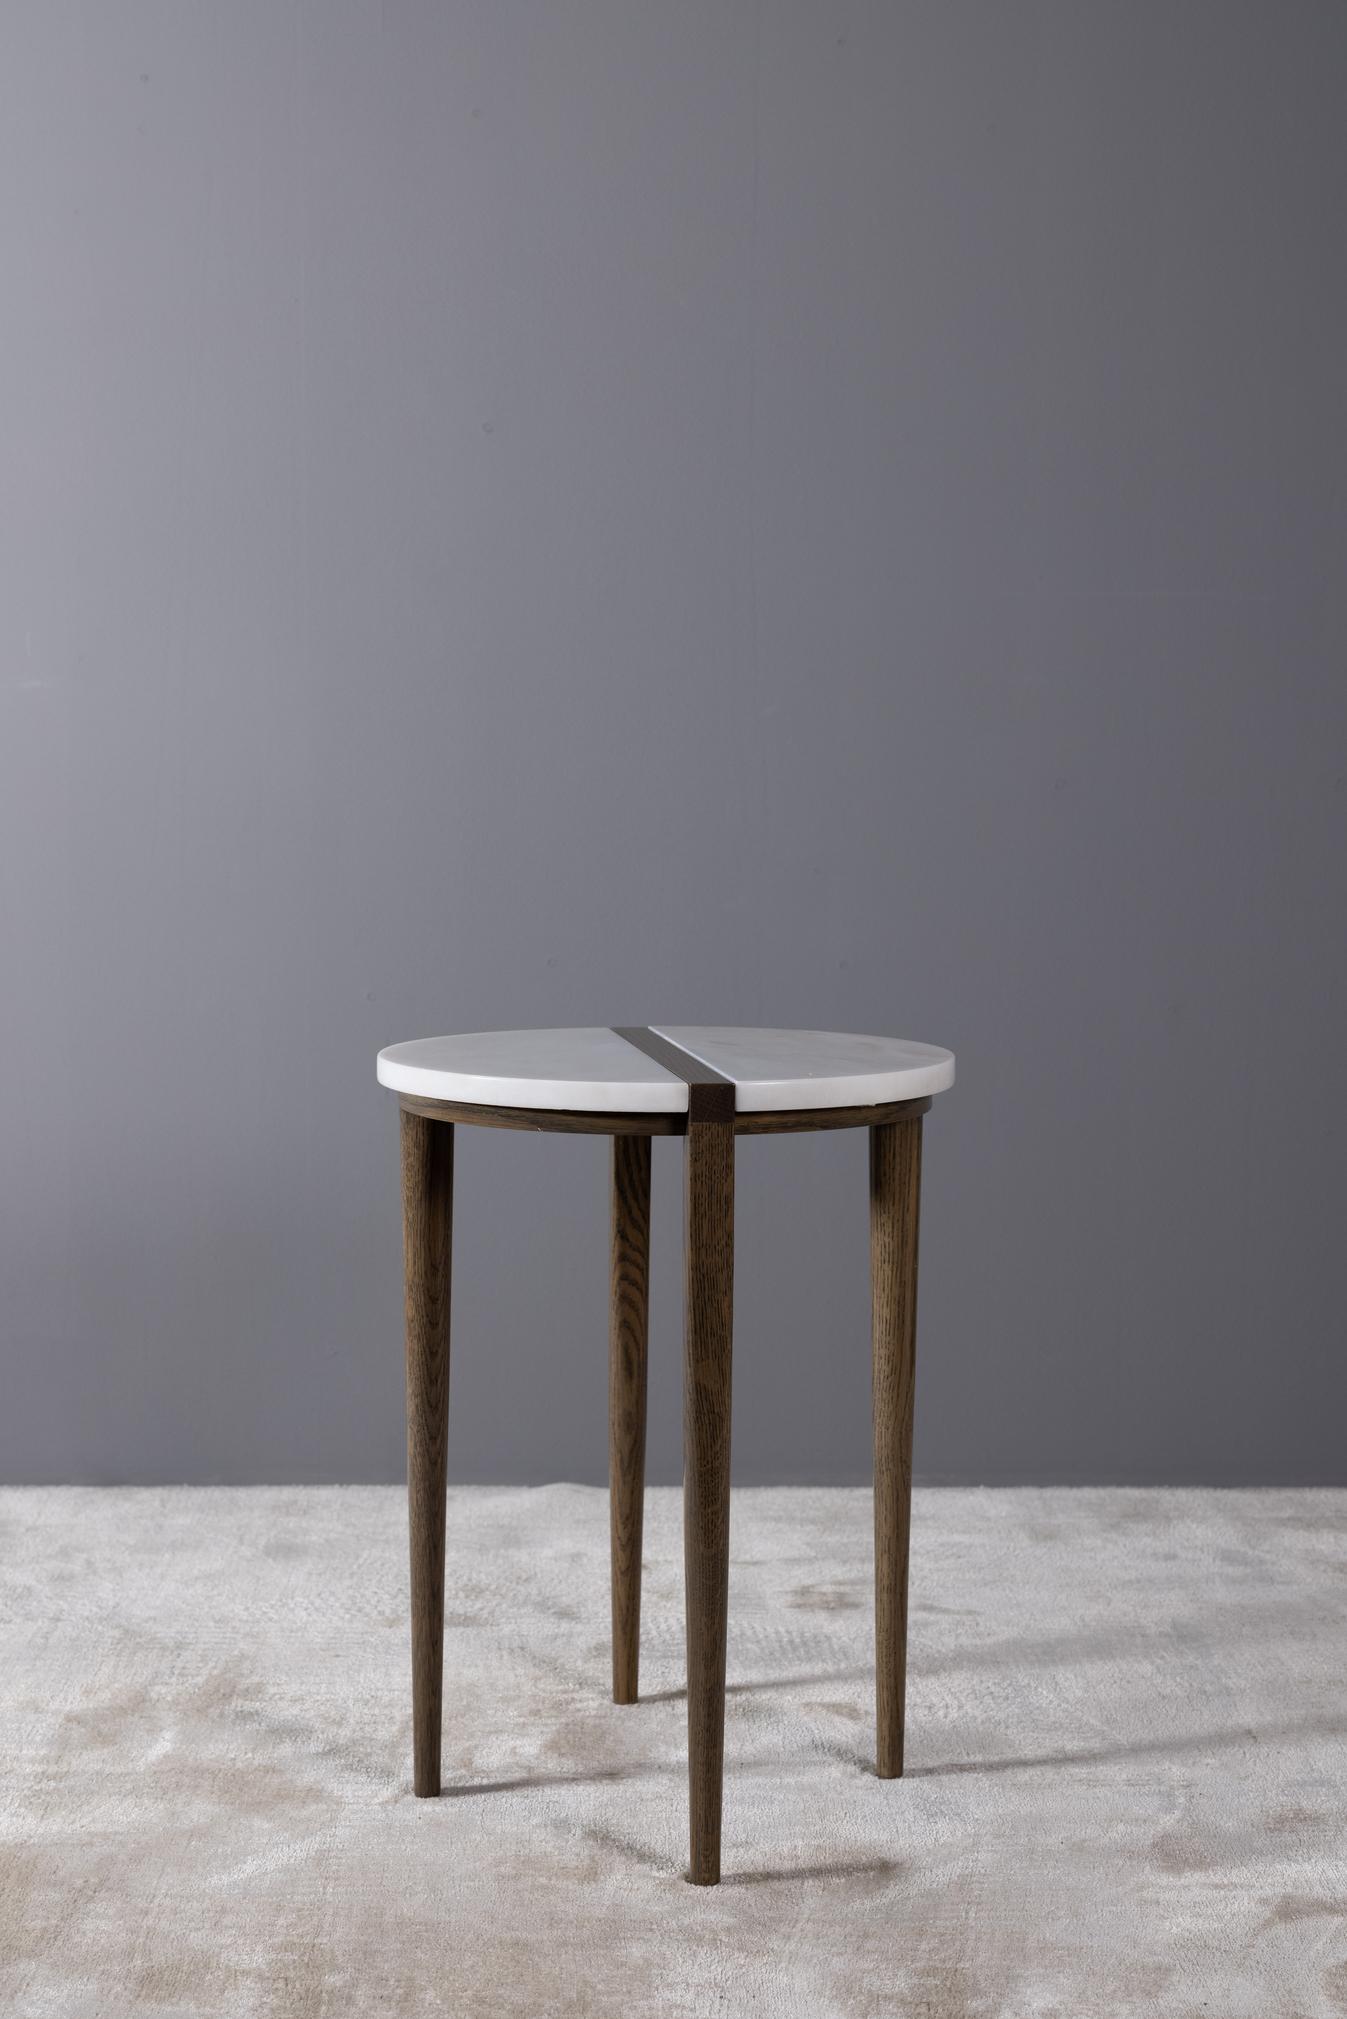 Alaíde side table, Handcrafted in Portugal - Europe by Greenapple.

The elegant and refined Alaíde side table is a real eye-catcher for any interior in which it is placed. As the table top made of Calacatta Bianco marble sits perfectly on the thin